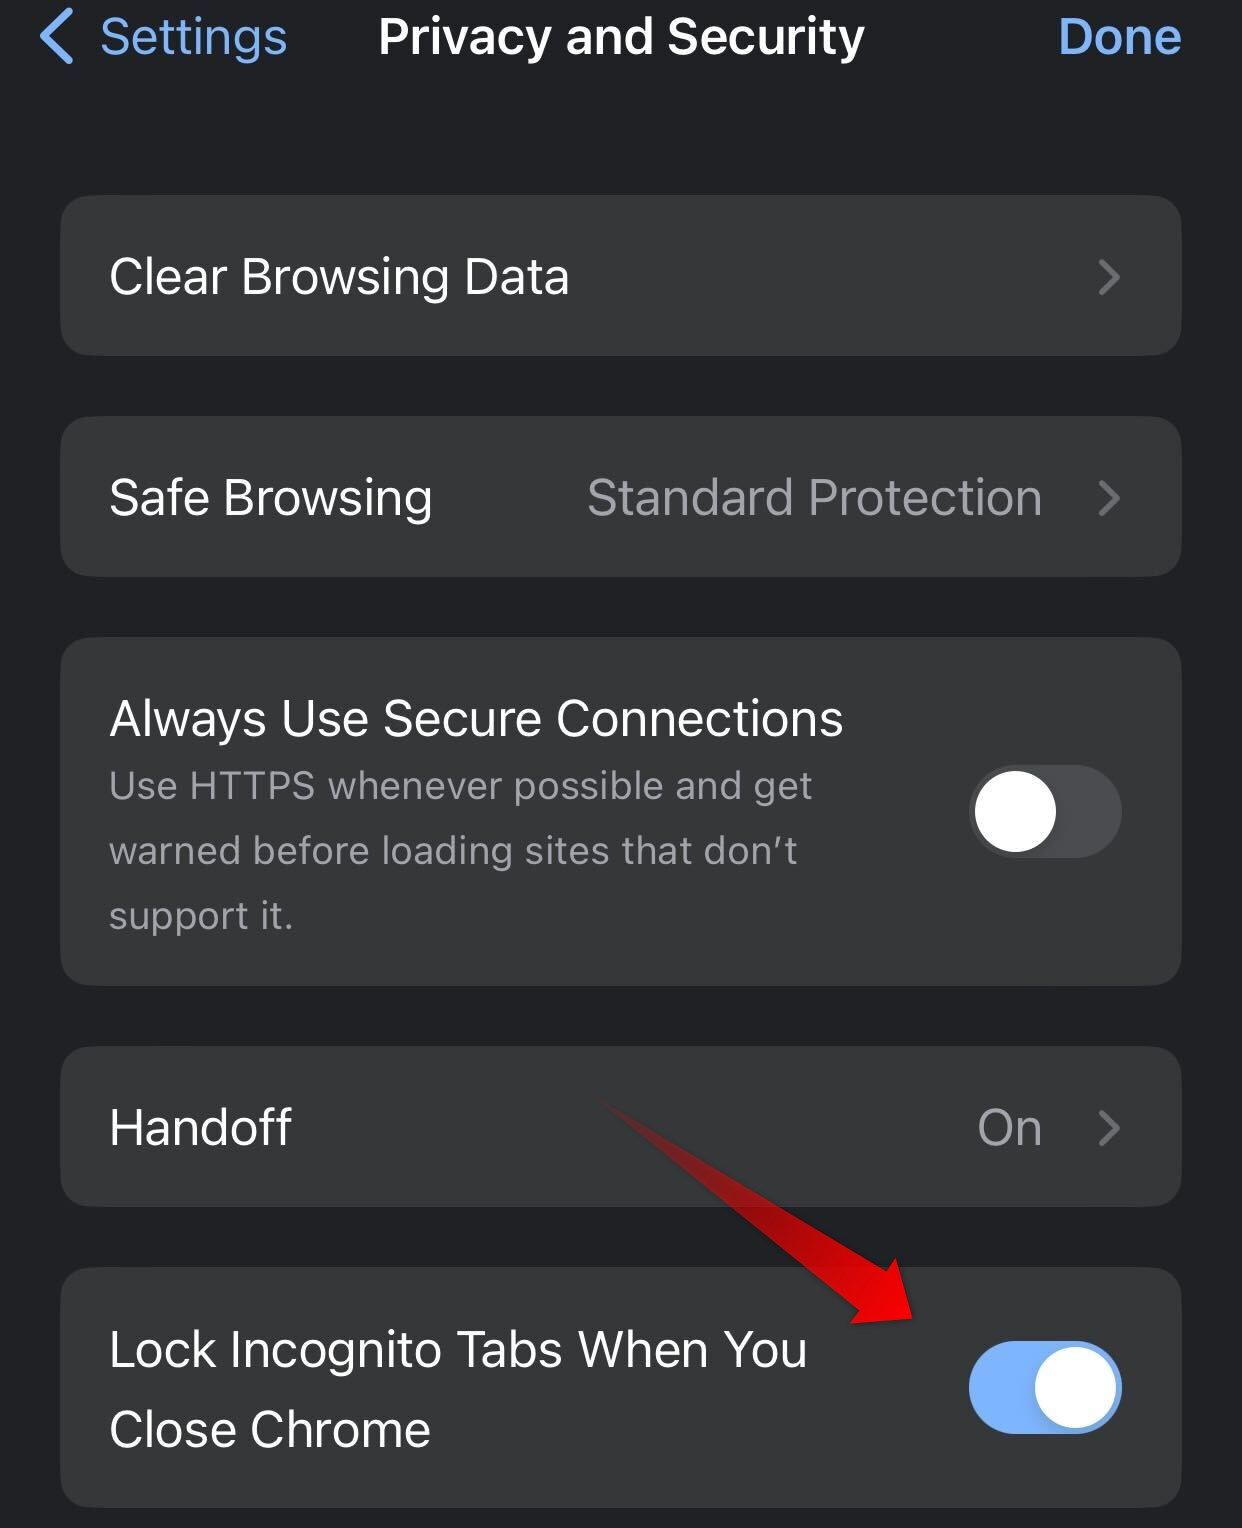 Turning on the lock incognito tabs feature in Chrome for iPhone.